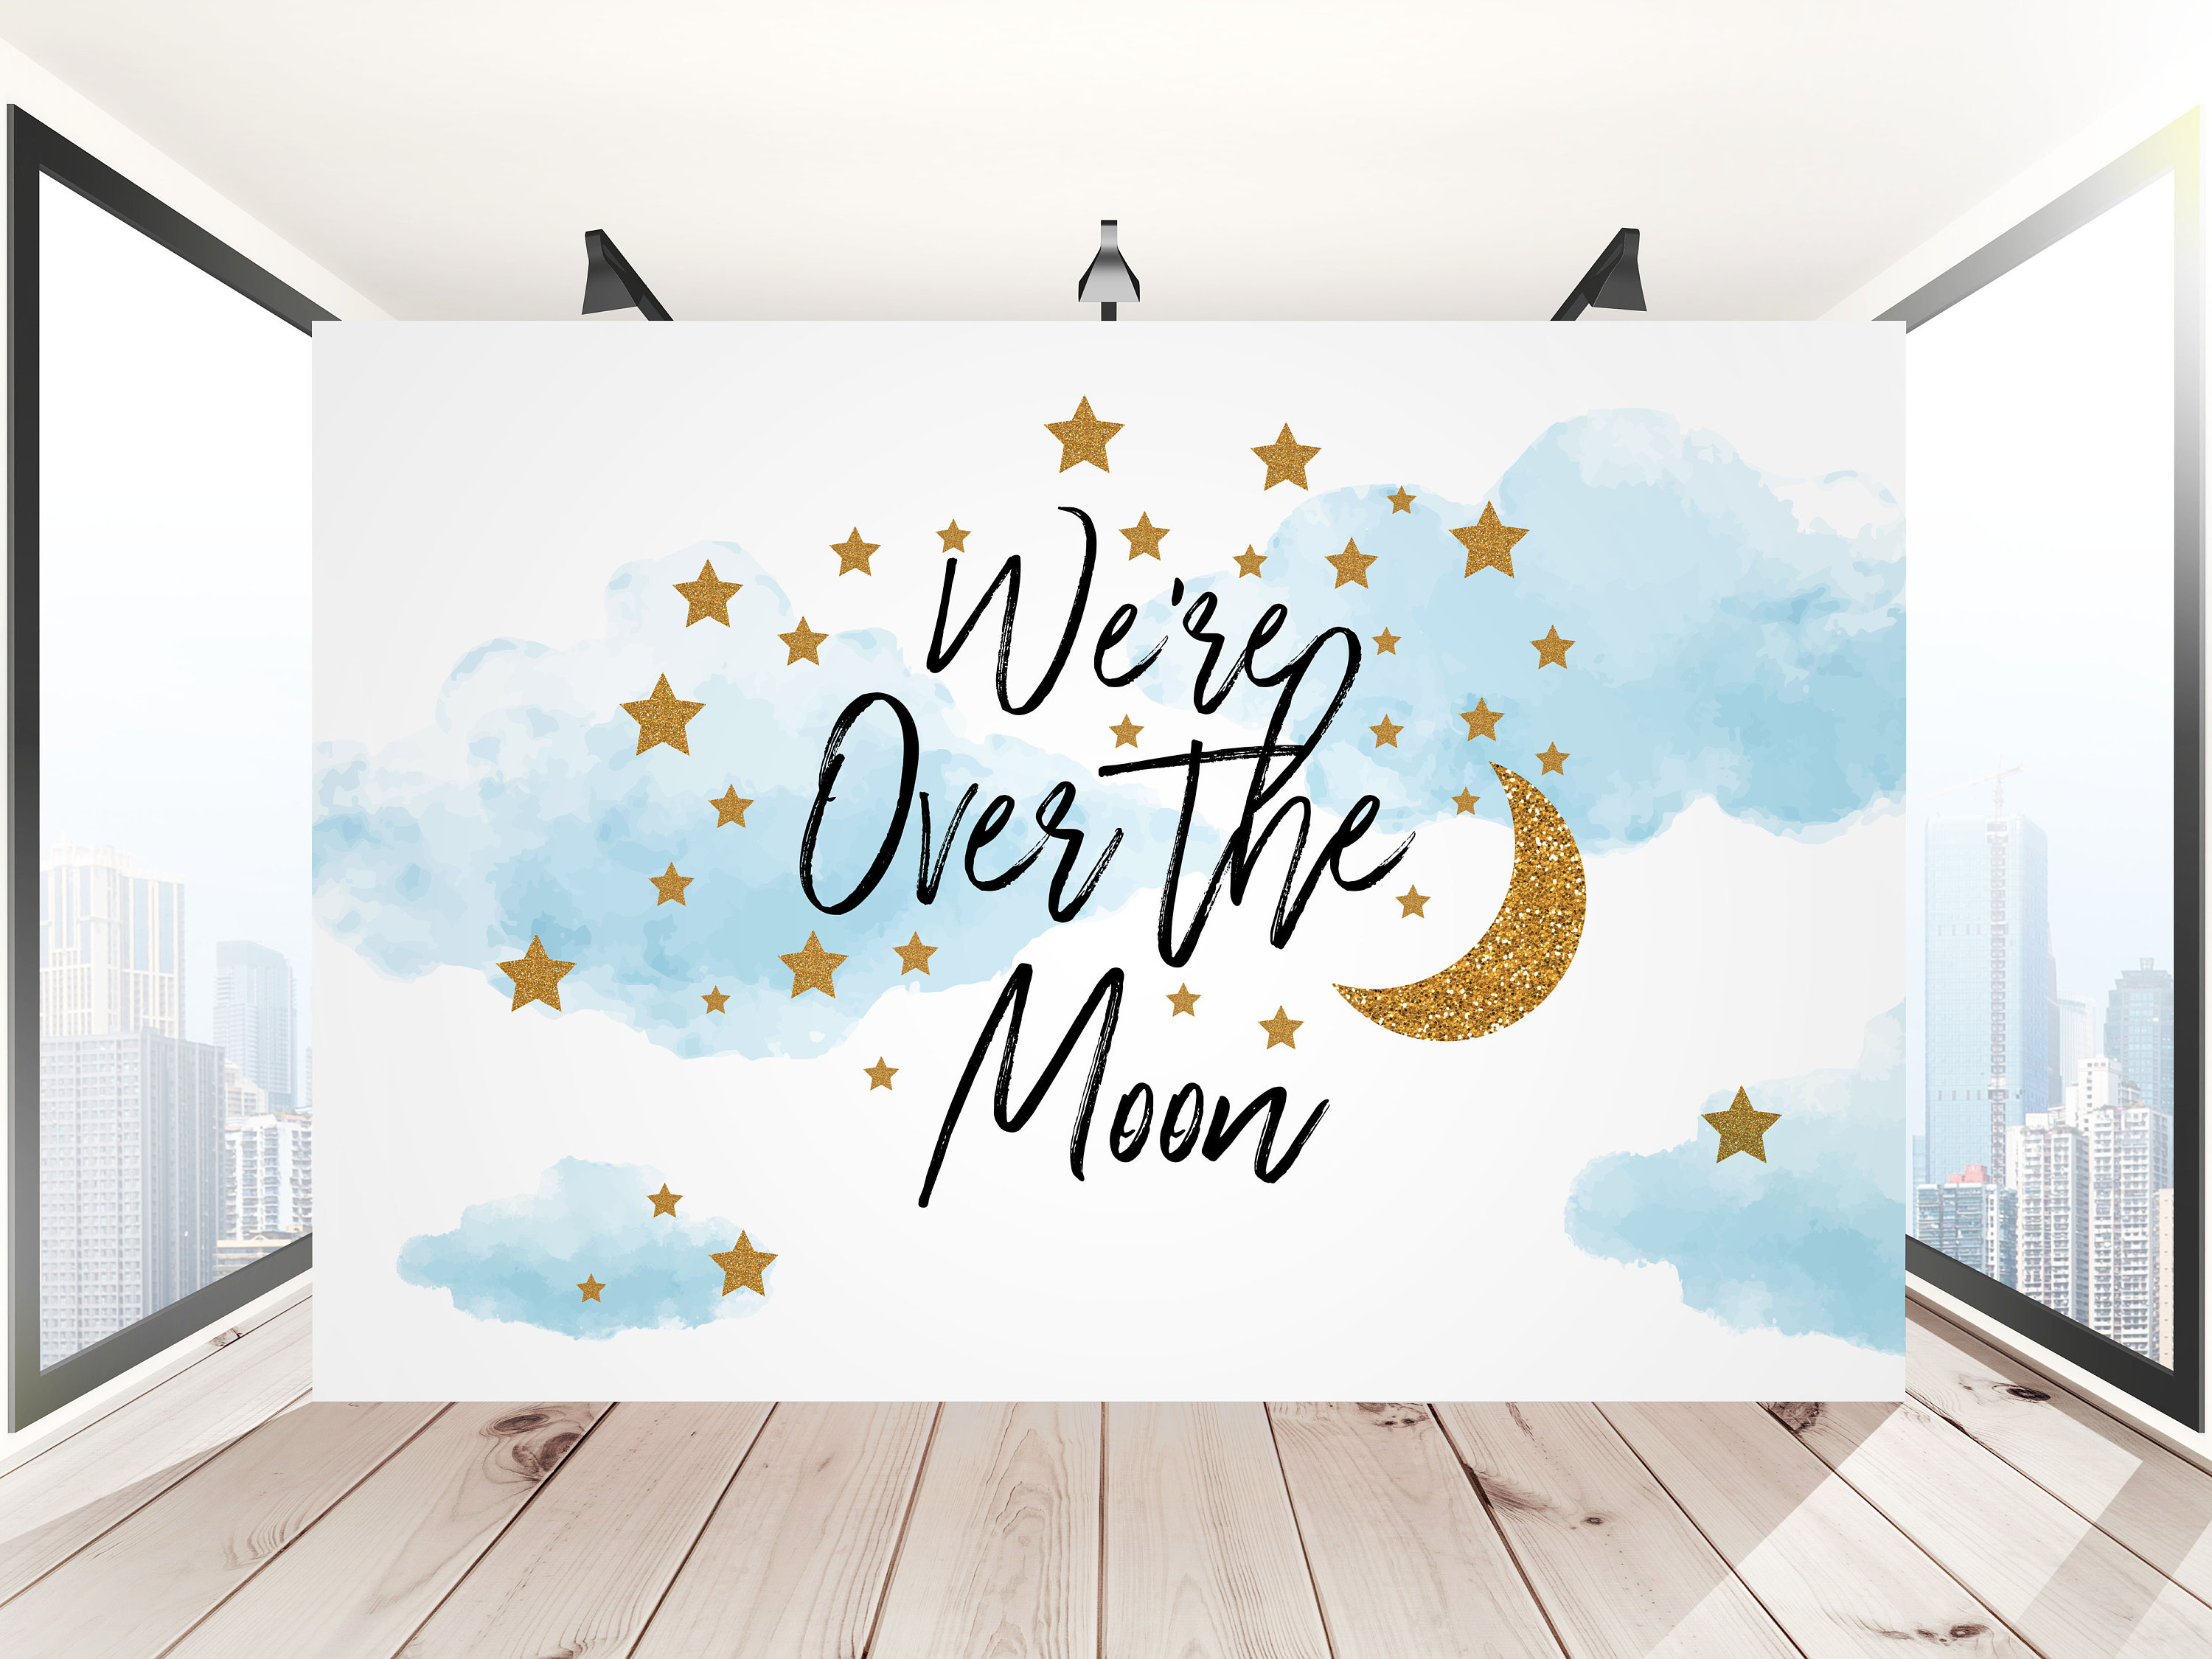 10x15 FT Photo Backdrops,Cat Jumping in The Air Catching The Moon at Night Sky with Stars Fantasy Artwork Background for Baby Shower Birthday Wedding Bridal Shower Party Decoration Photo Studio 